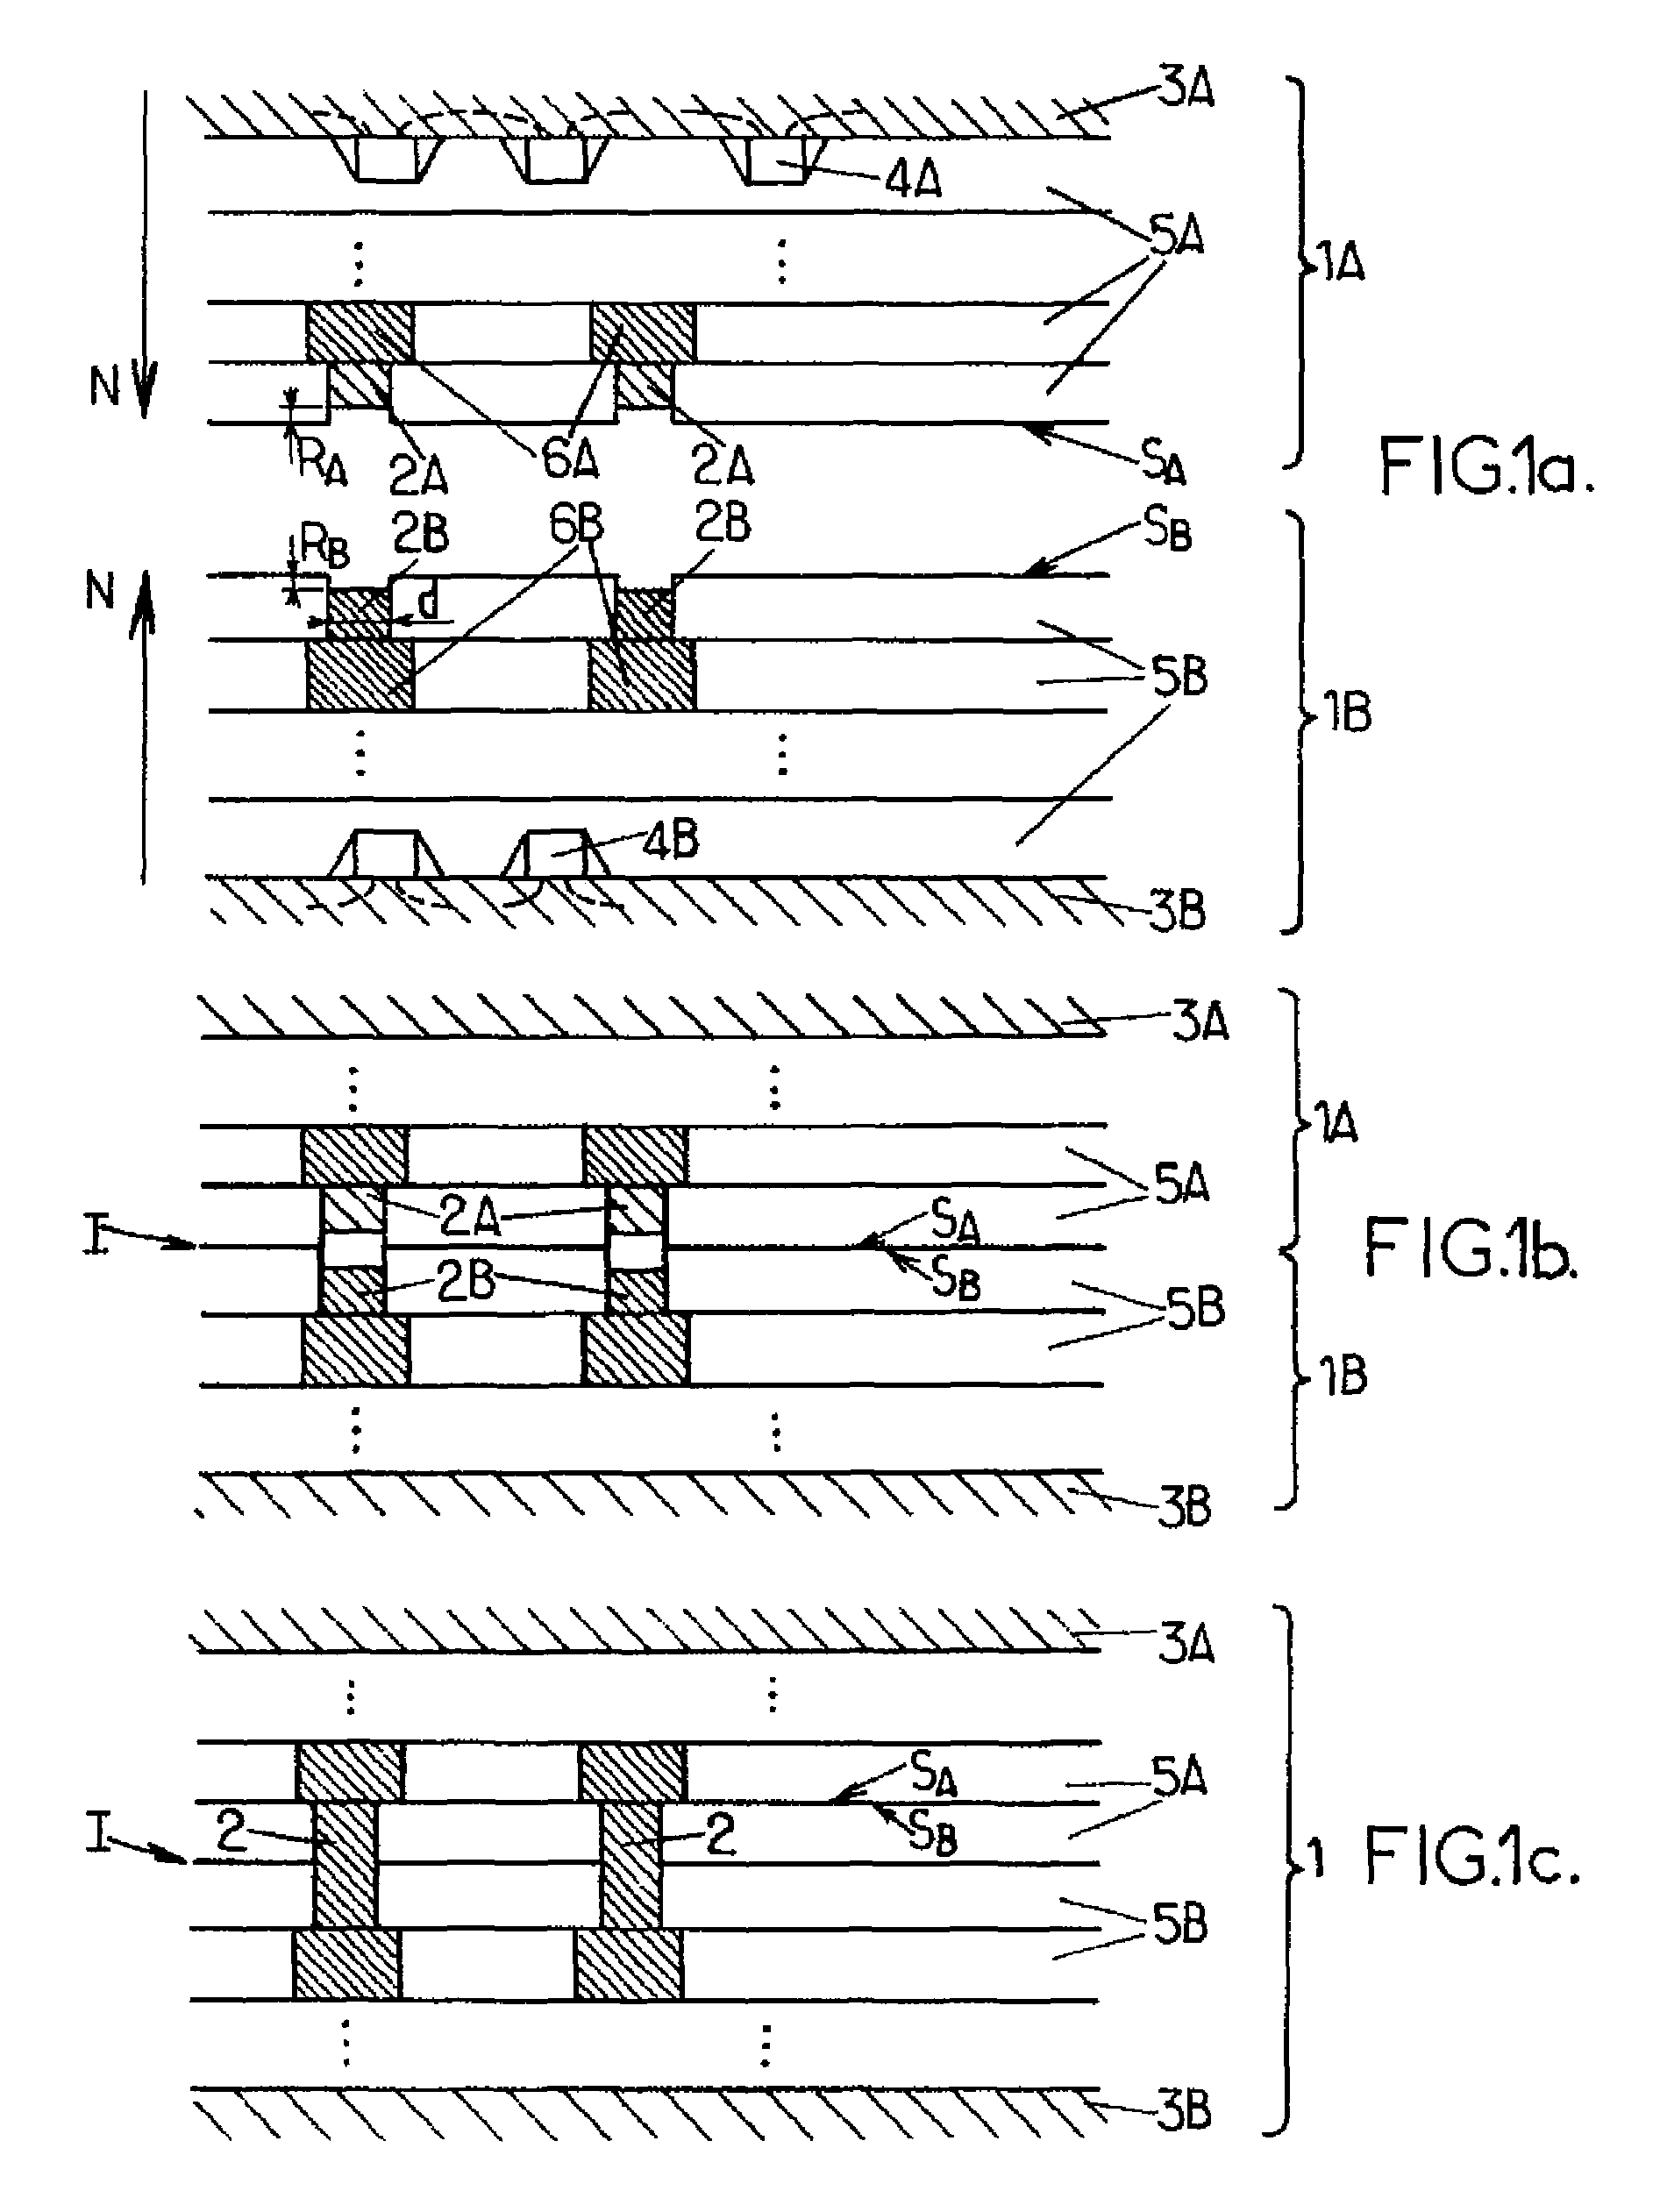 Assembly of two parts of an integrated electronic circuit